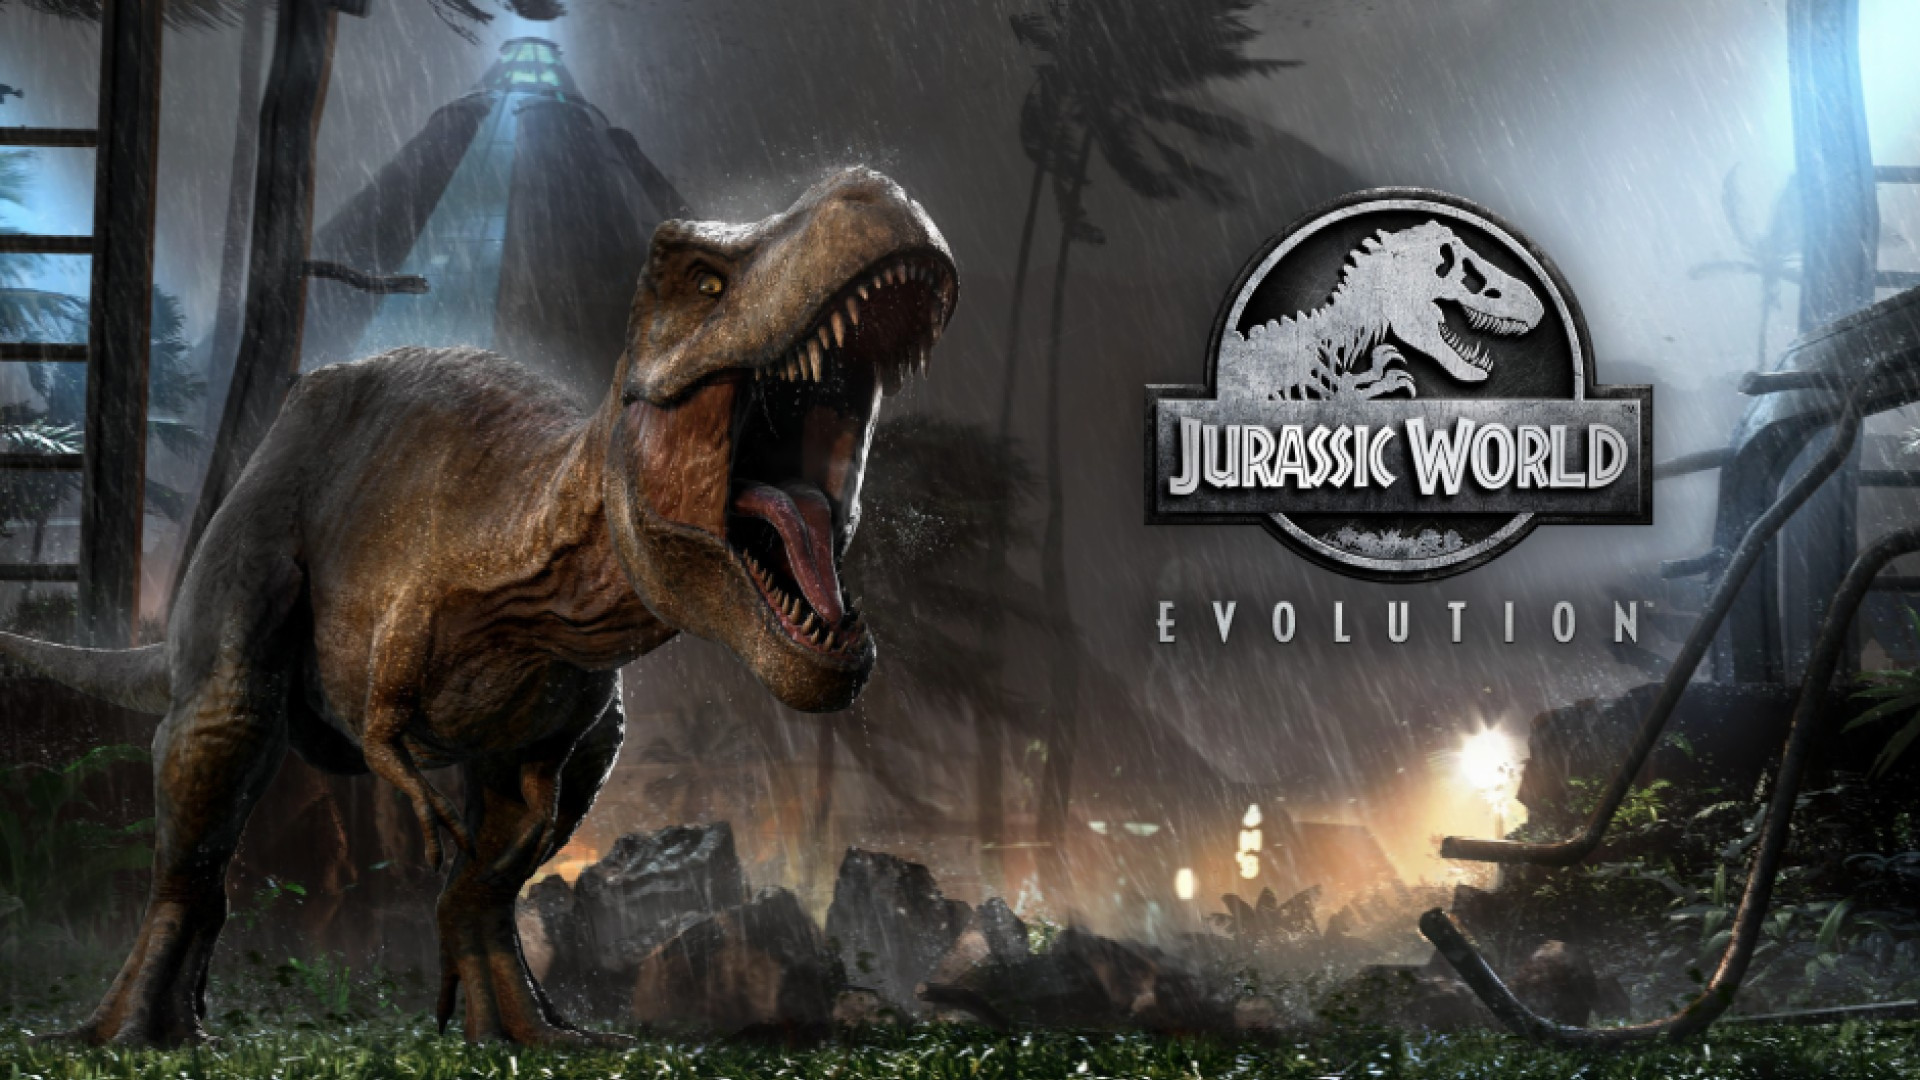 Jurassic World Evolution Xbox one Release Date, Gameplay and Overview